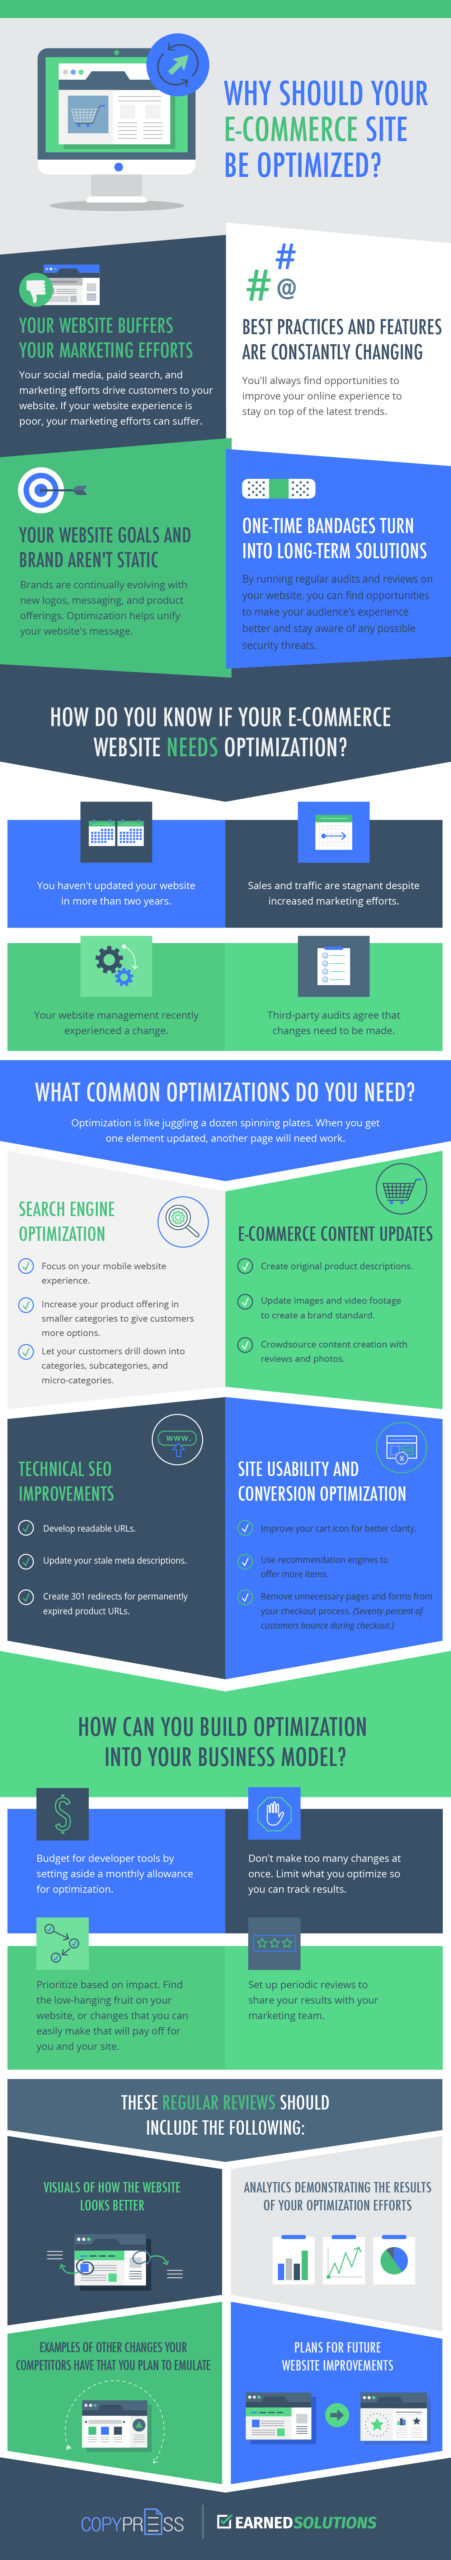 Infographic – Why Should Your E-Commerce Site Be Optimized?